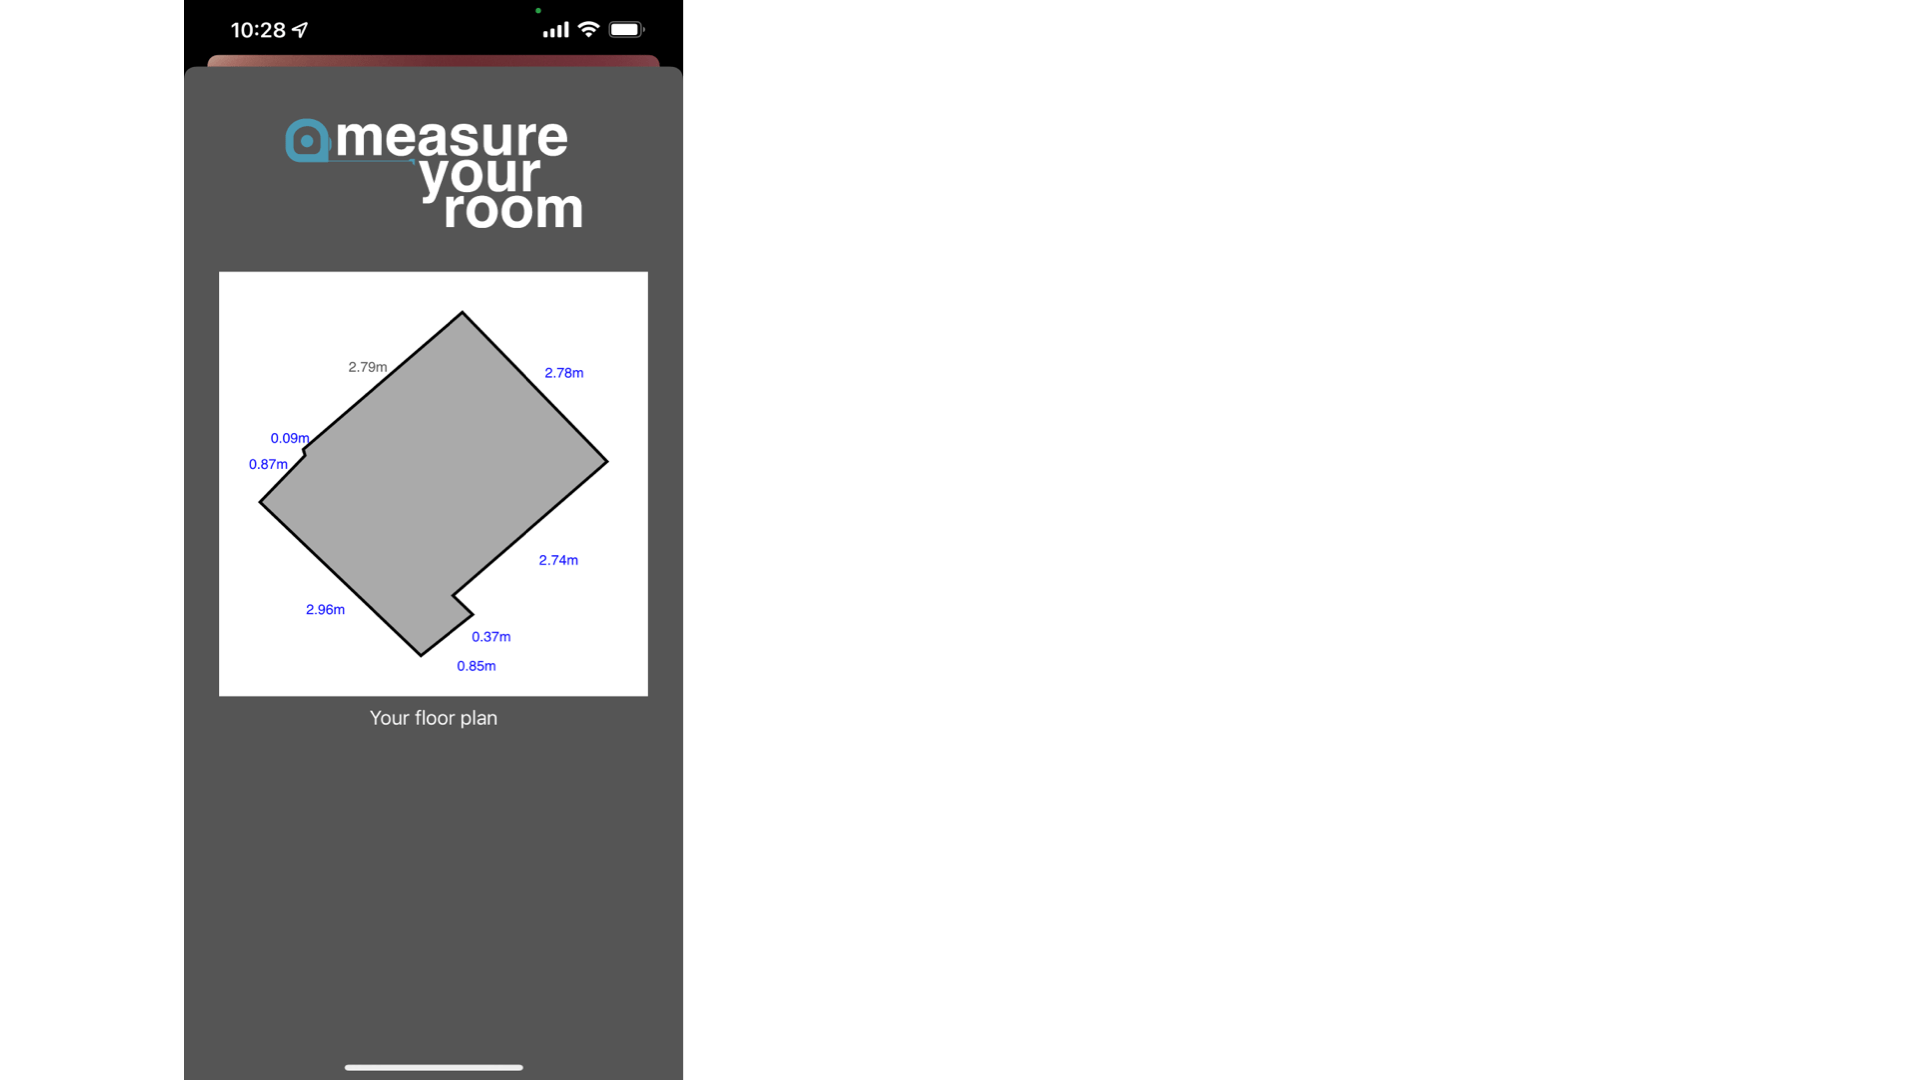 As screenshot of the layout of the room along with the measurements of each wall